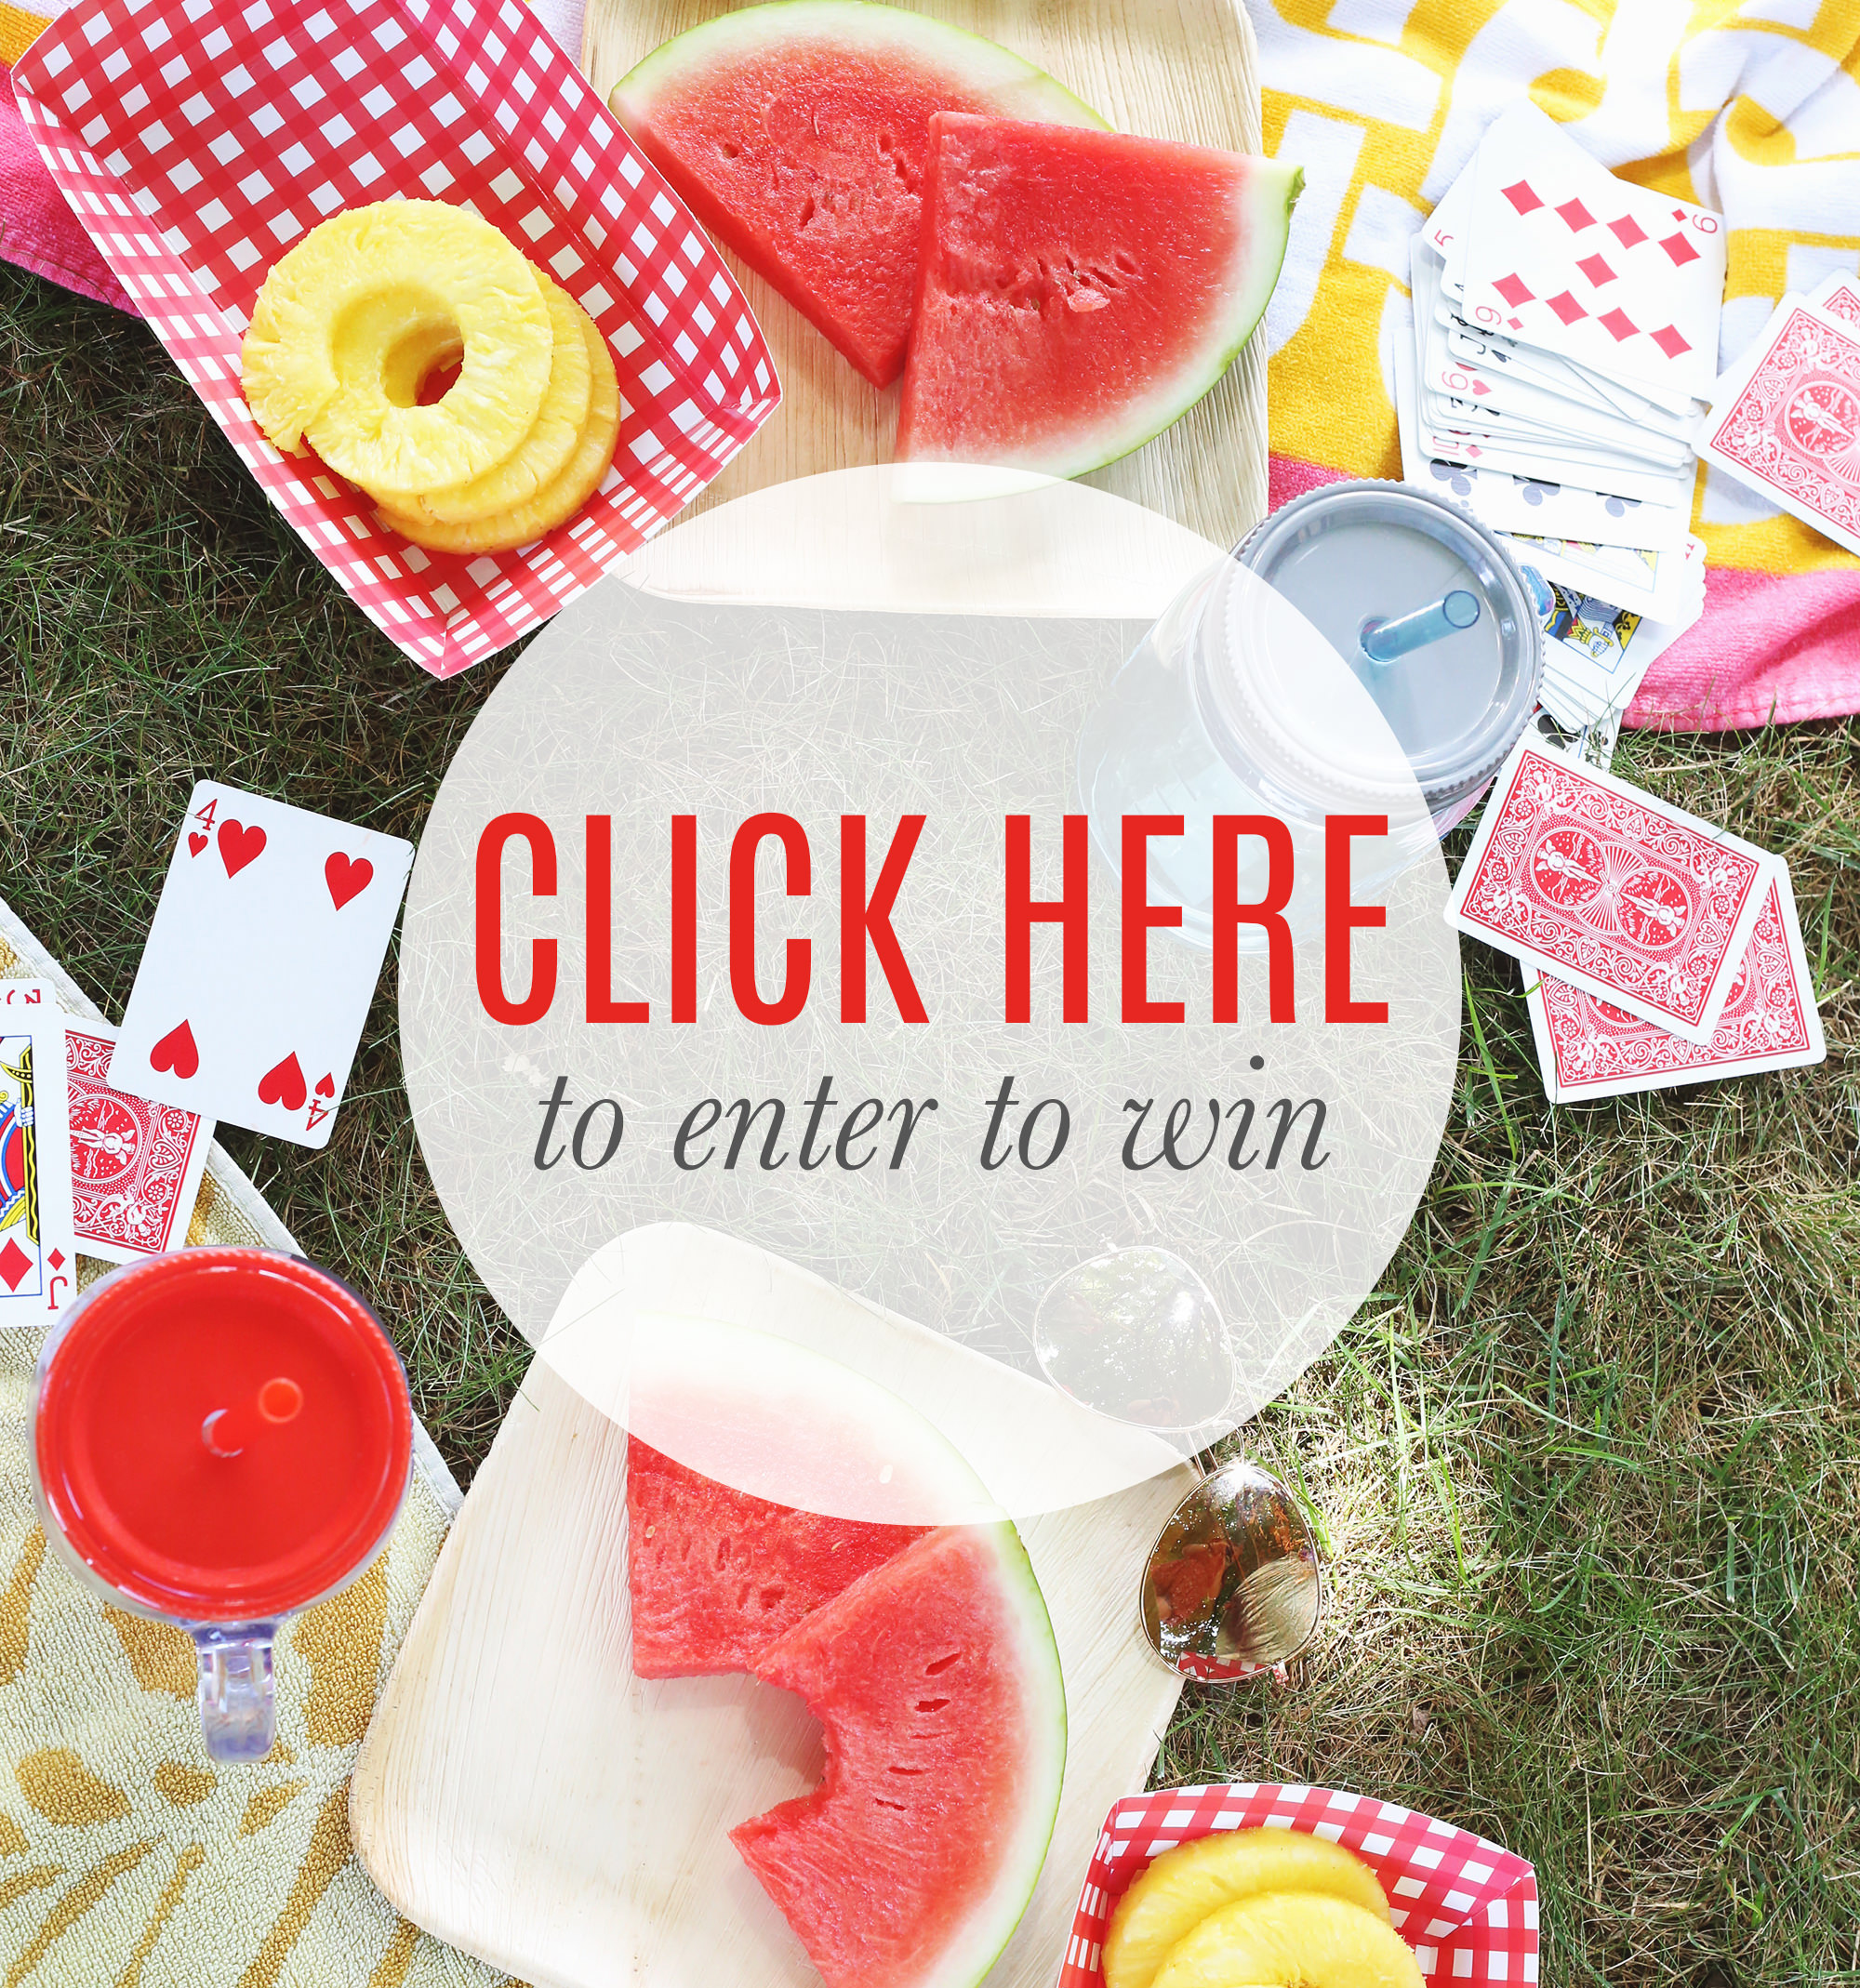 Enter to win our August Happy Mail and receive items for your next picnic! Via Lily & Val Living!